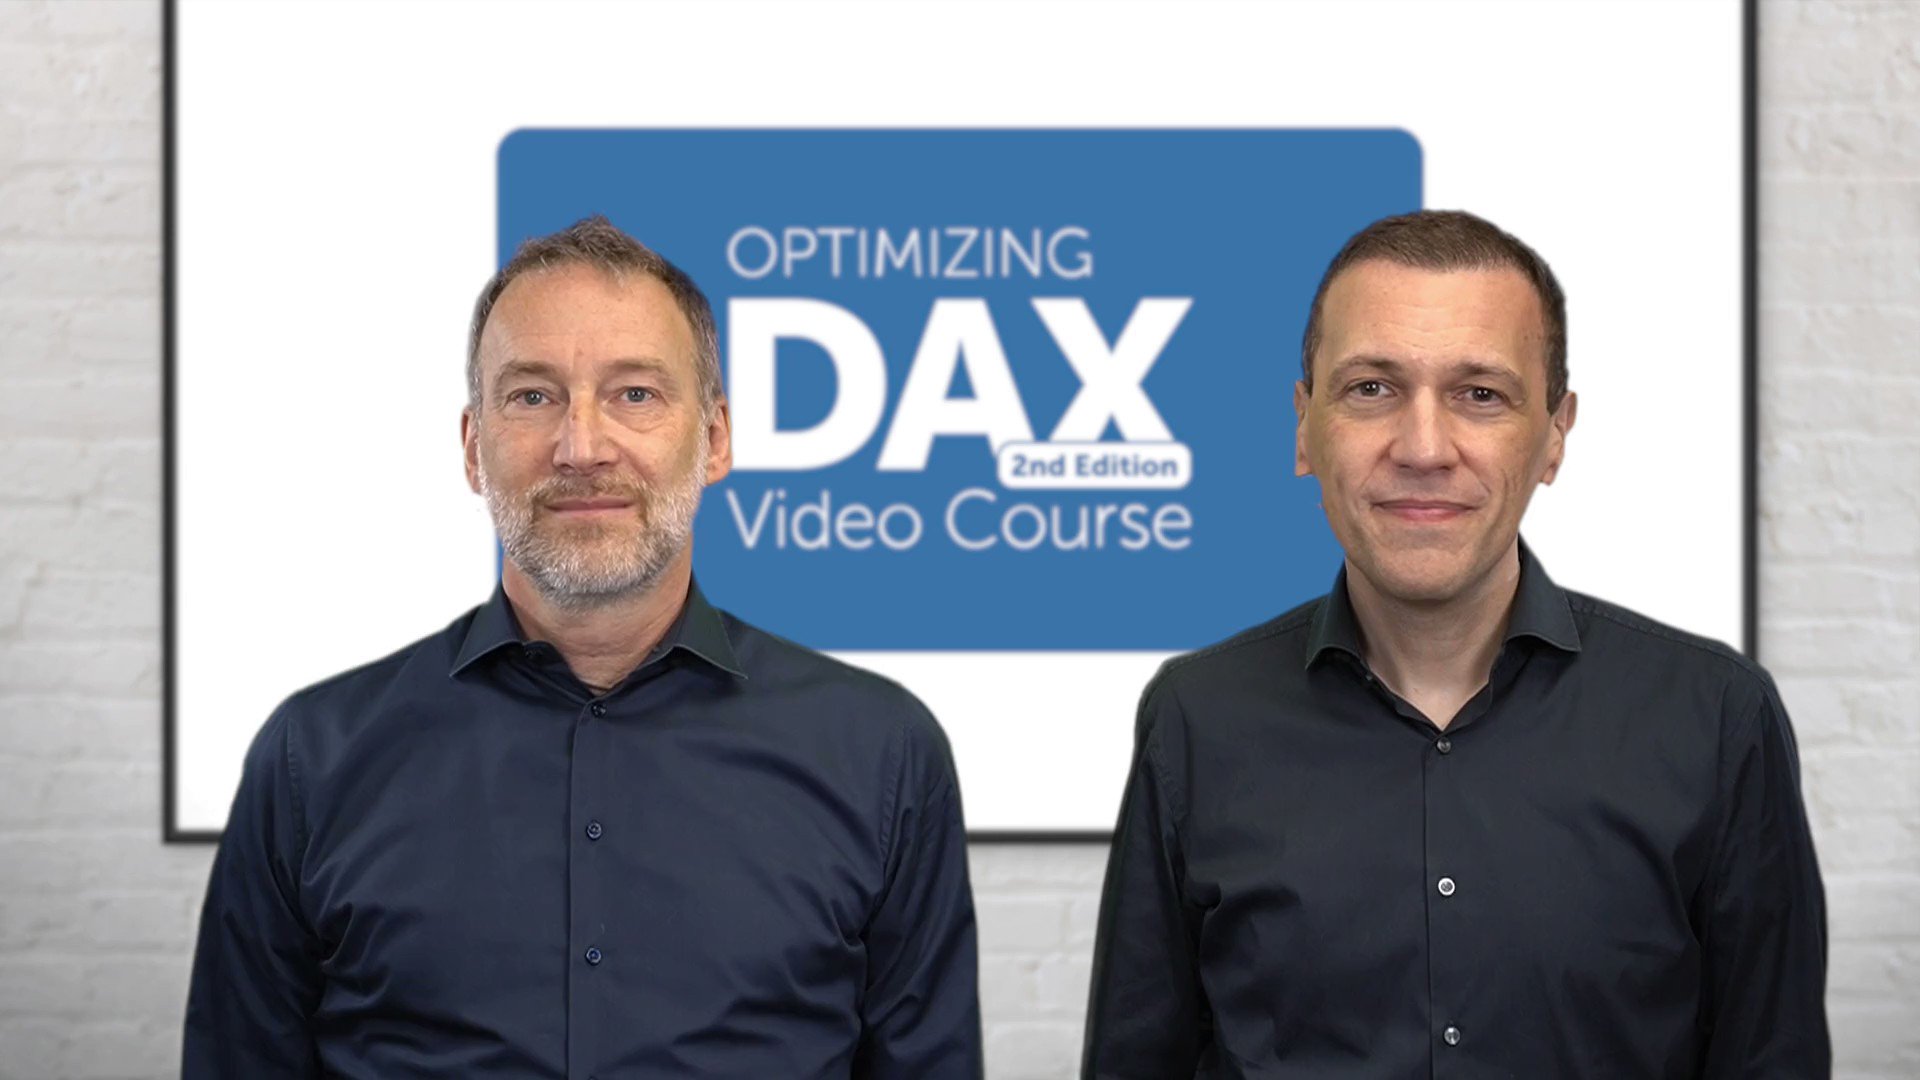 Marco Russo on X: Optimizing DAX second edition is available. New